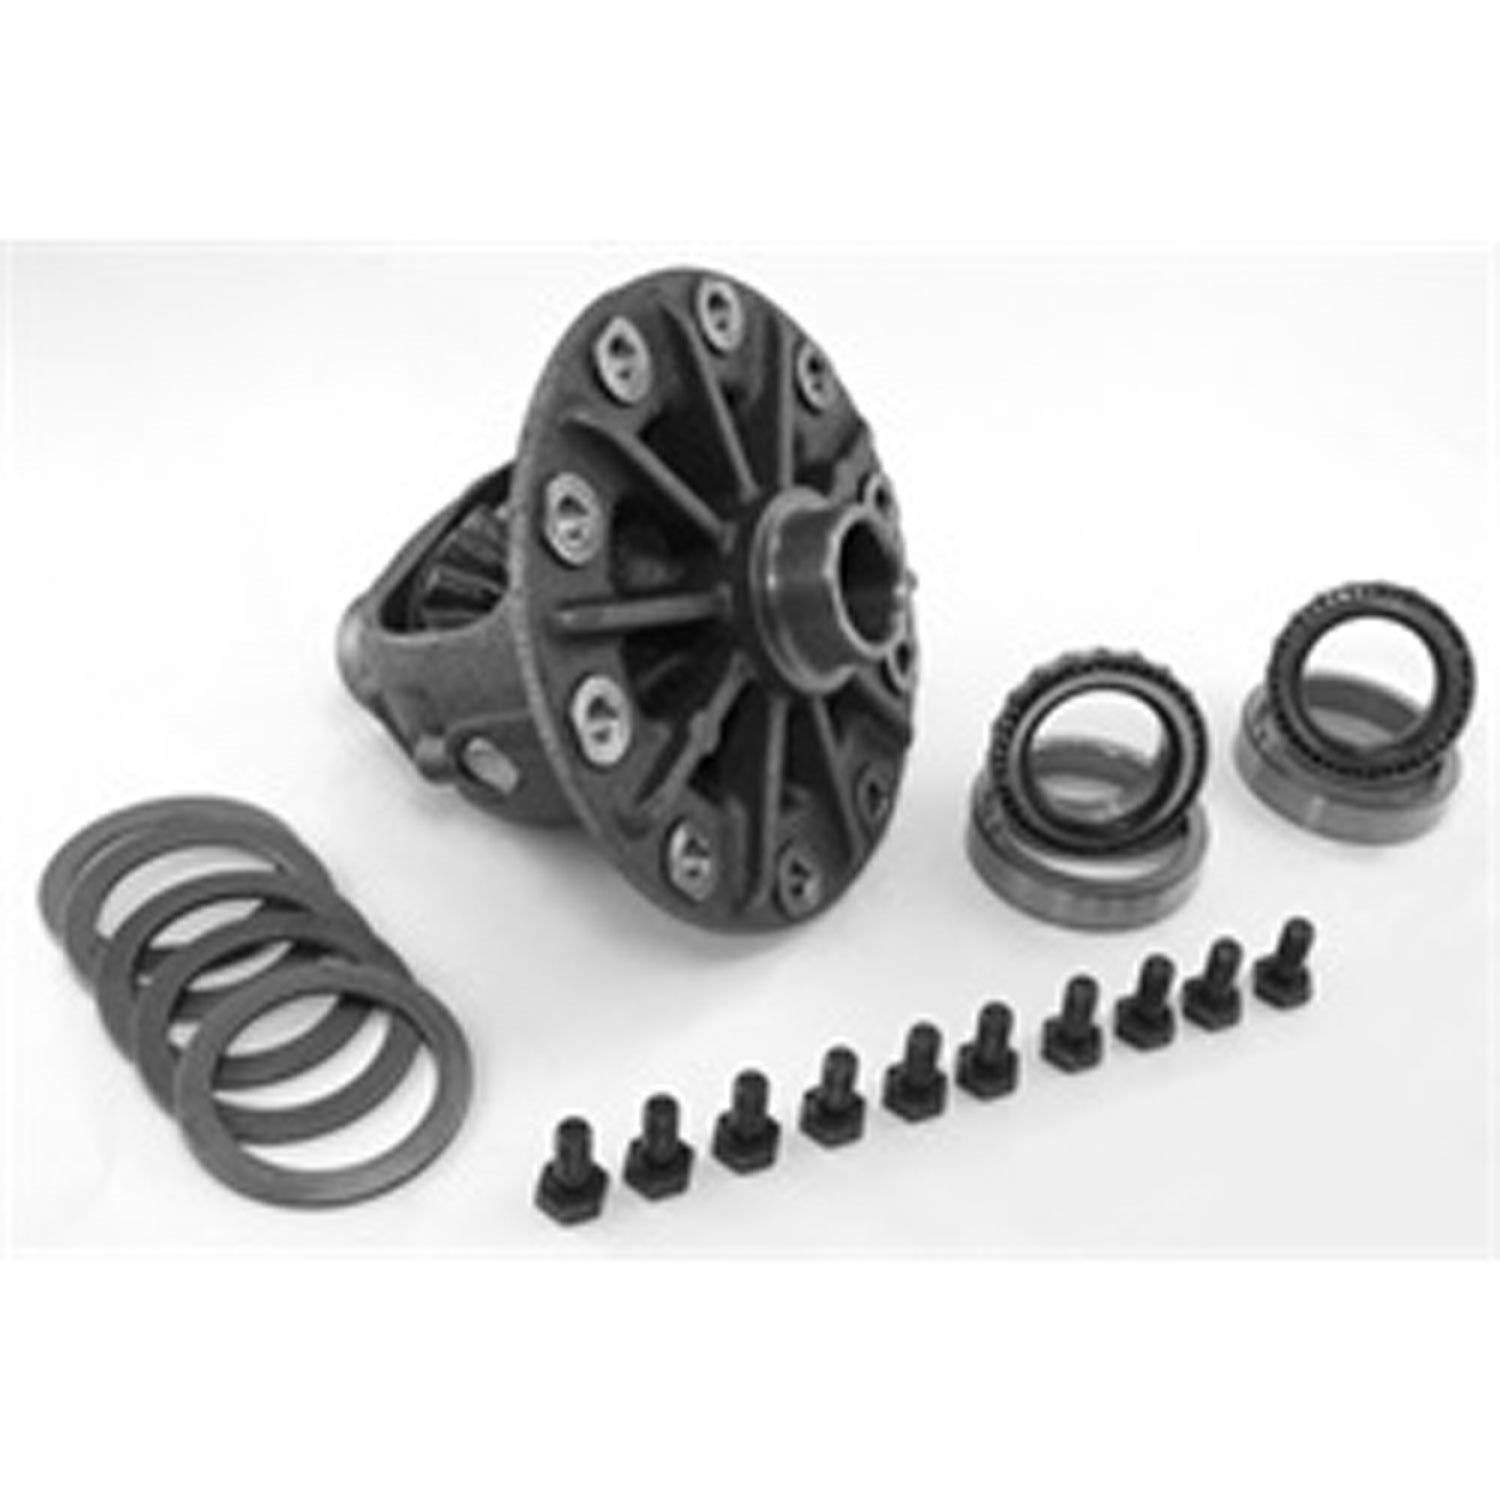 Standard differential case assembly for Dana Super 30